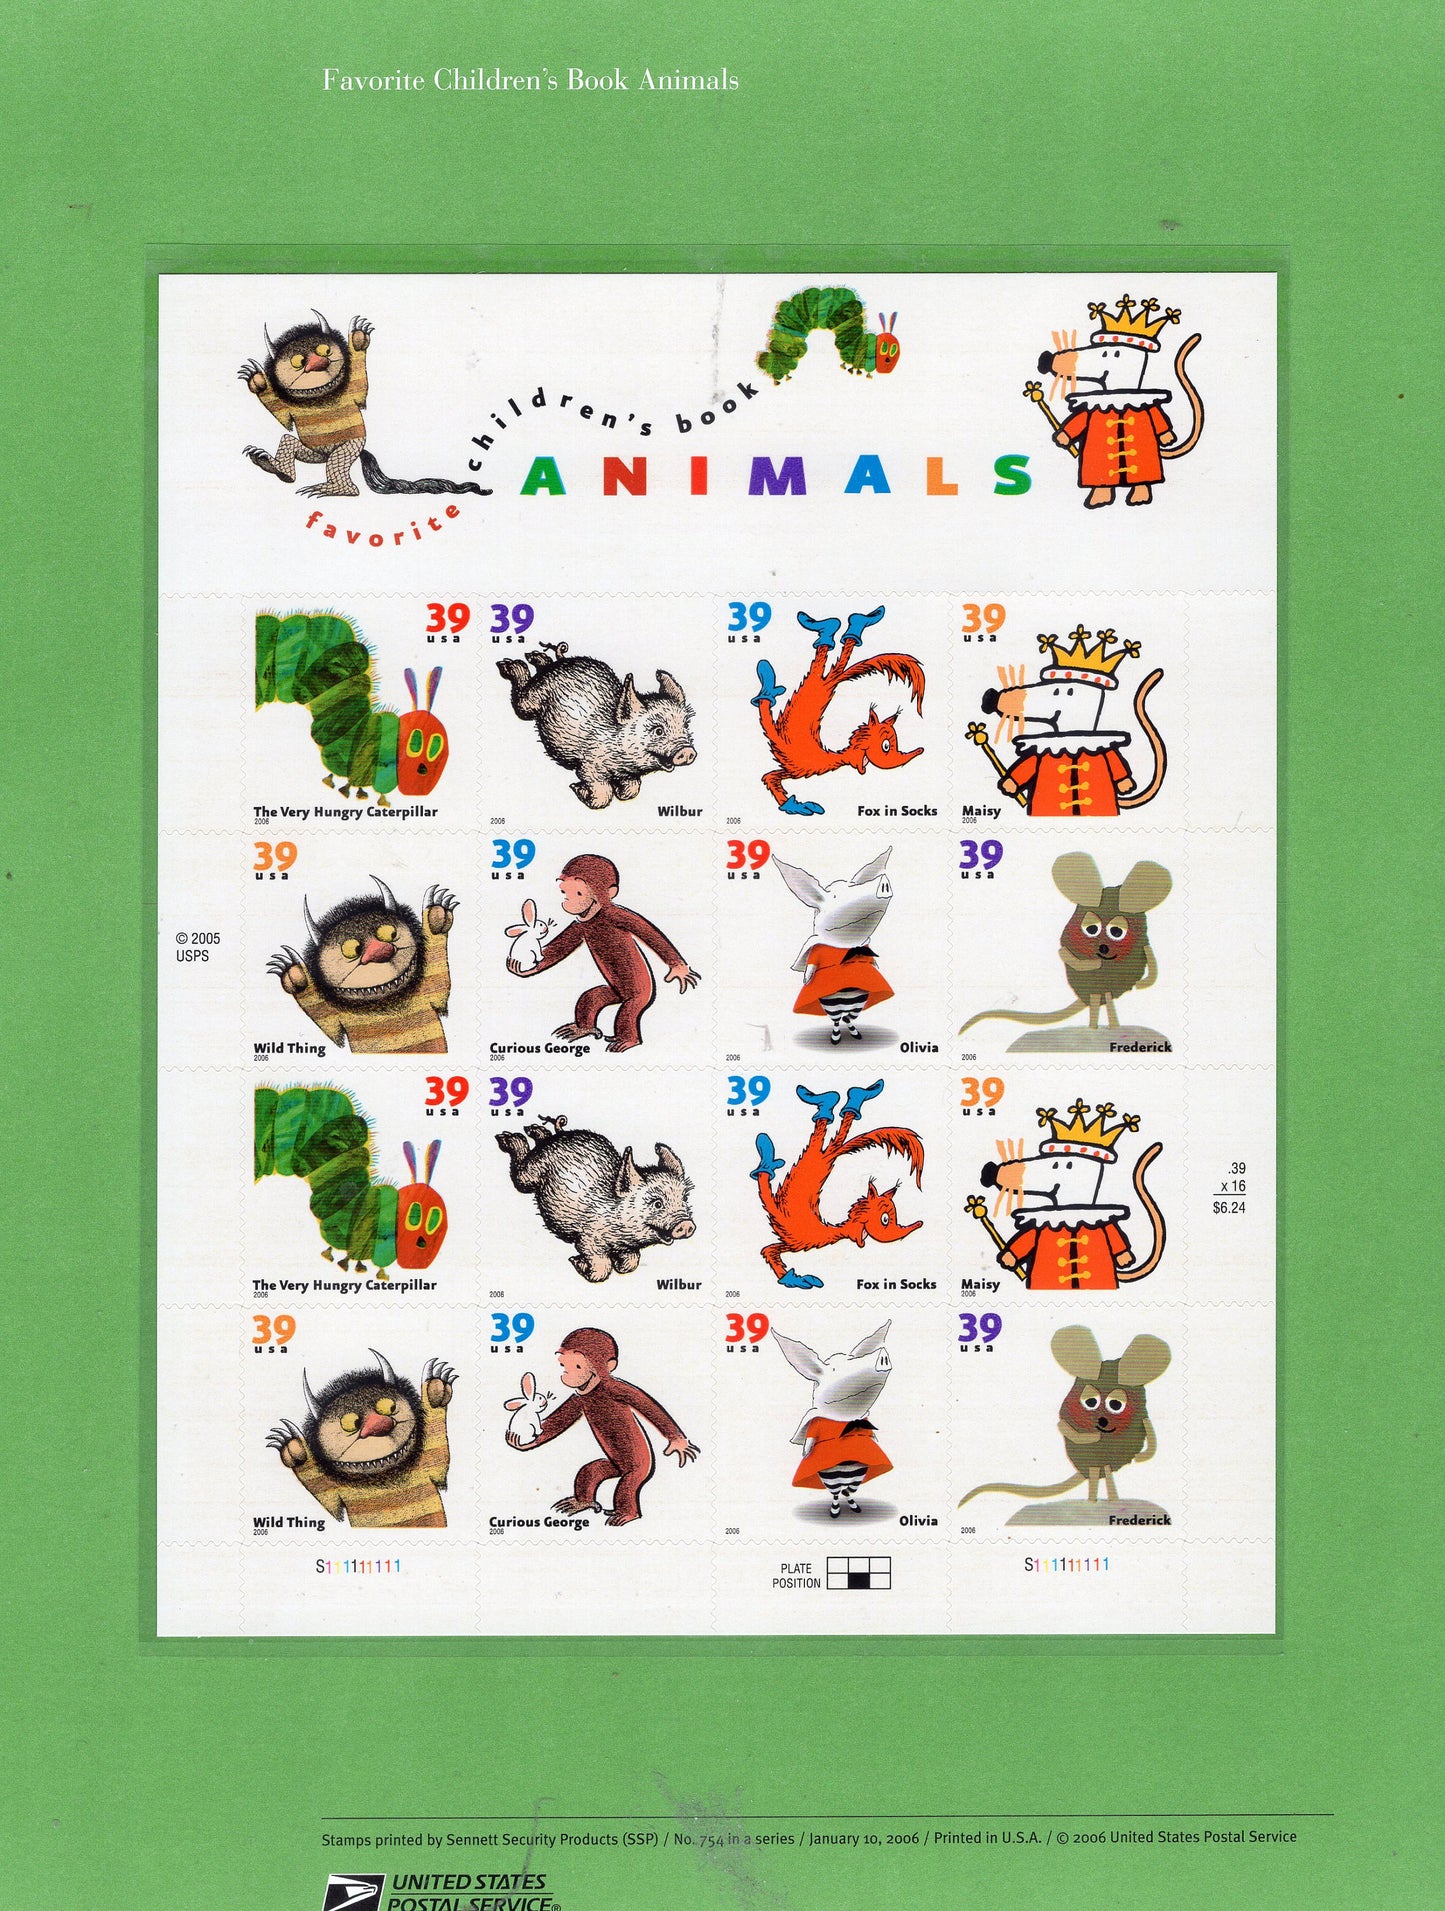 CHILDEN'S BOOK ANIMALS Seuss Commemorative Panels with Sheet of 16 Stamps, Illustrations Descriptive Text Great Gift 8.5x11 -